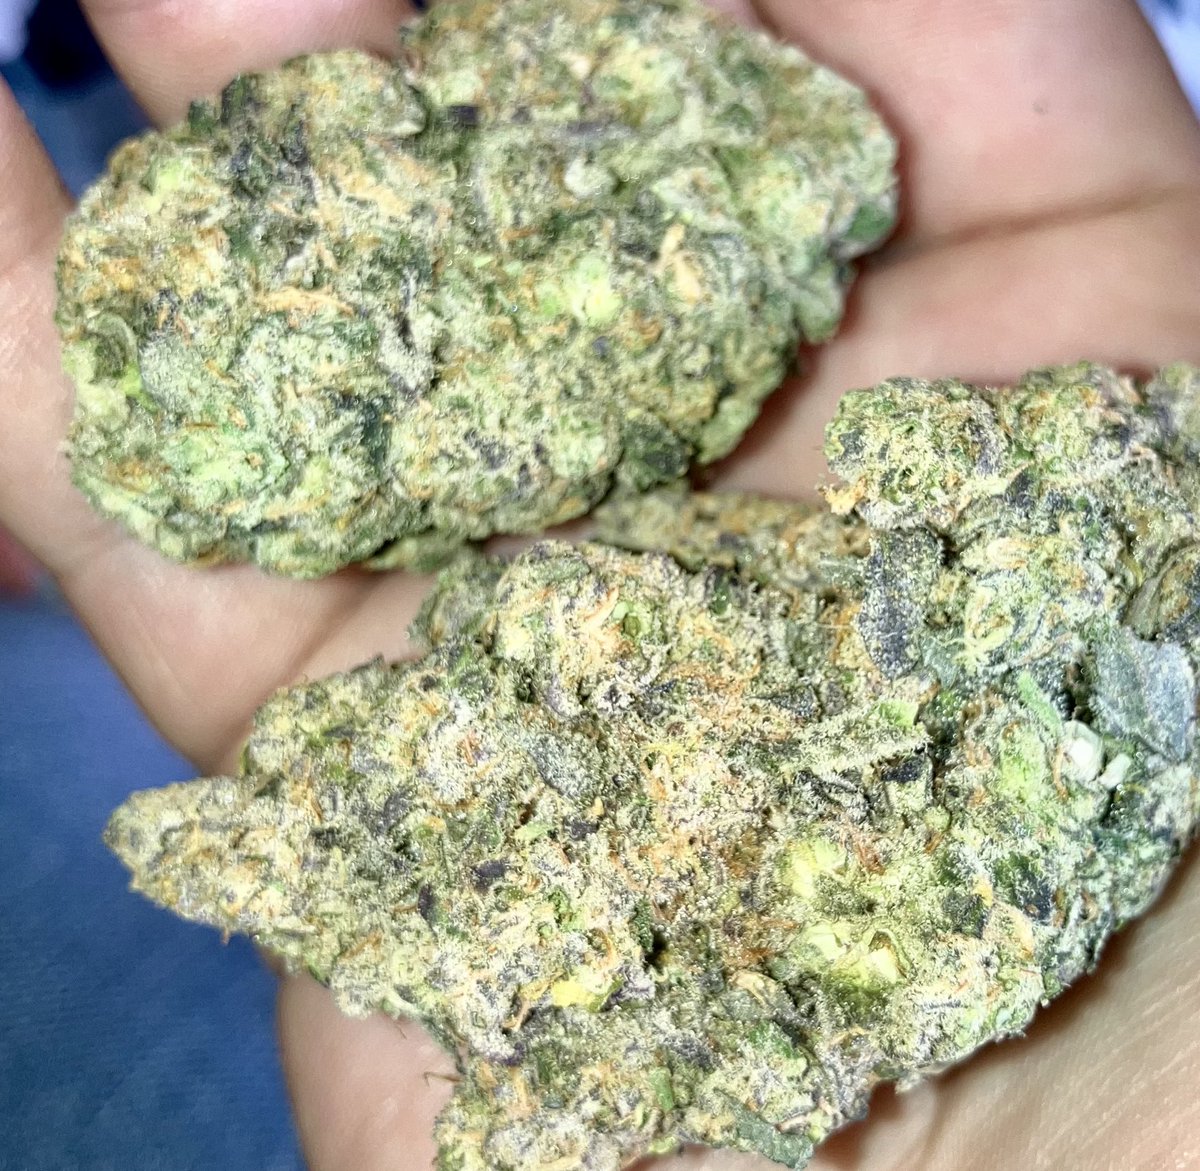 Gas face is combining Face Mints with a Biscotti x Sherbet backcross. stanky, and dense, with a thick, strong smoke. helping ease depression, stress, and anxiety #cannabiscommunity #cannabis #medicine